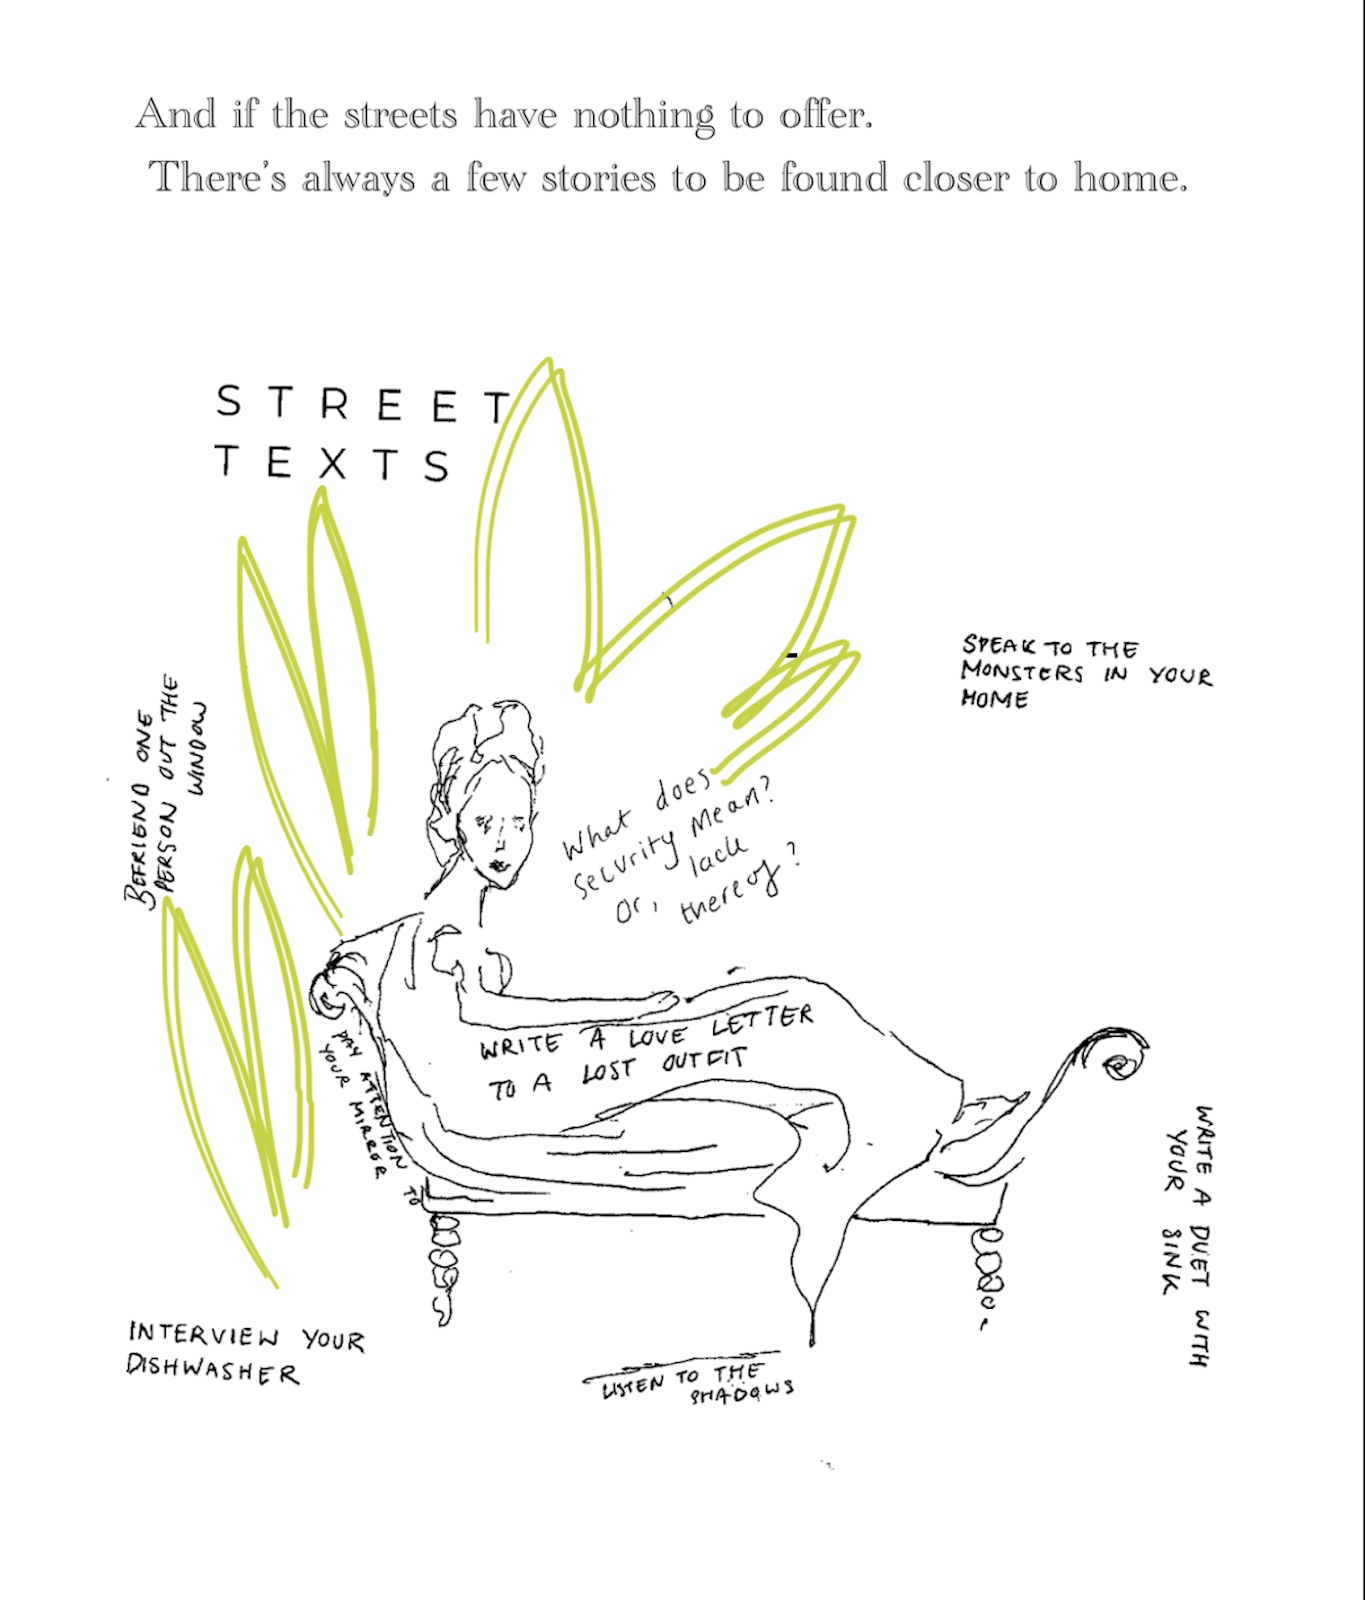 Street Texts continues, And if the streets have nothing to offer. There’s always a few stories to be found closer to home. Below it a hand drawn image of a woman reclining on a sofa. She’s encircled by green marks and handwritten notes that read, What does security mean? Or lack thereof? Speak to the monsters in your home. Write a duet with your sink. Listen to the shadows. Interview your dishwasher. Write a love letter to a lost outfit. Pay attention to your mirror. Befriend one person out the window.